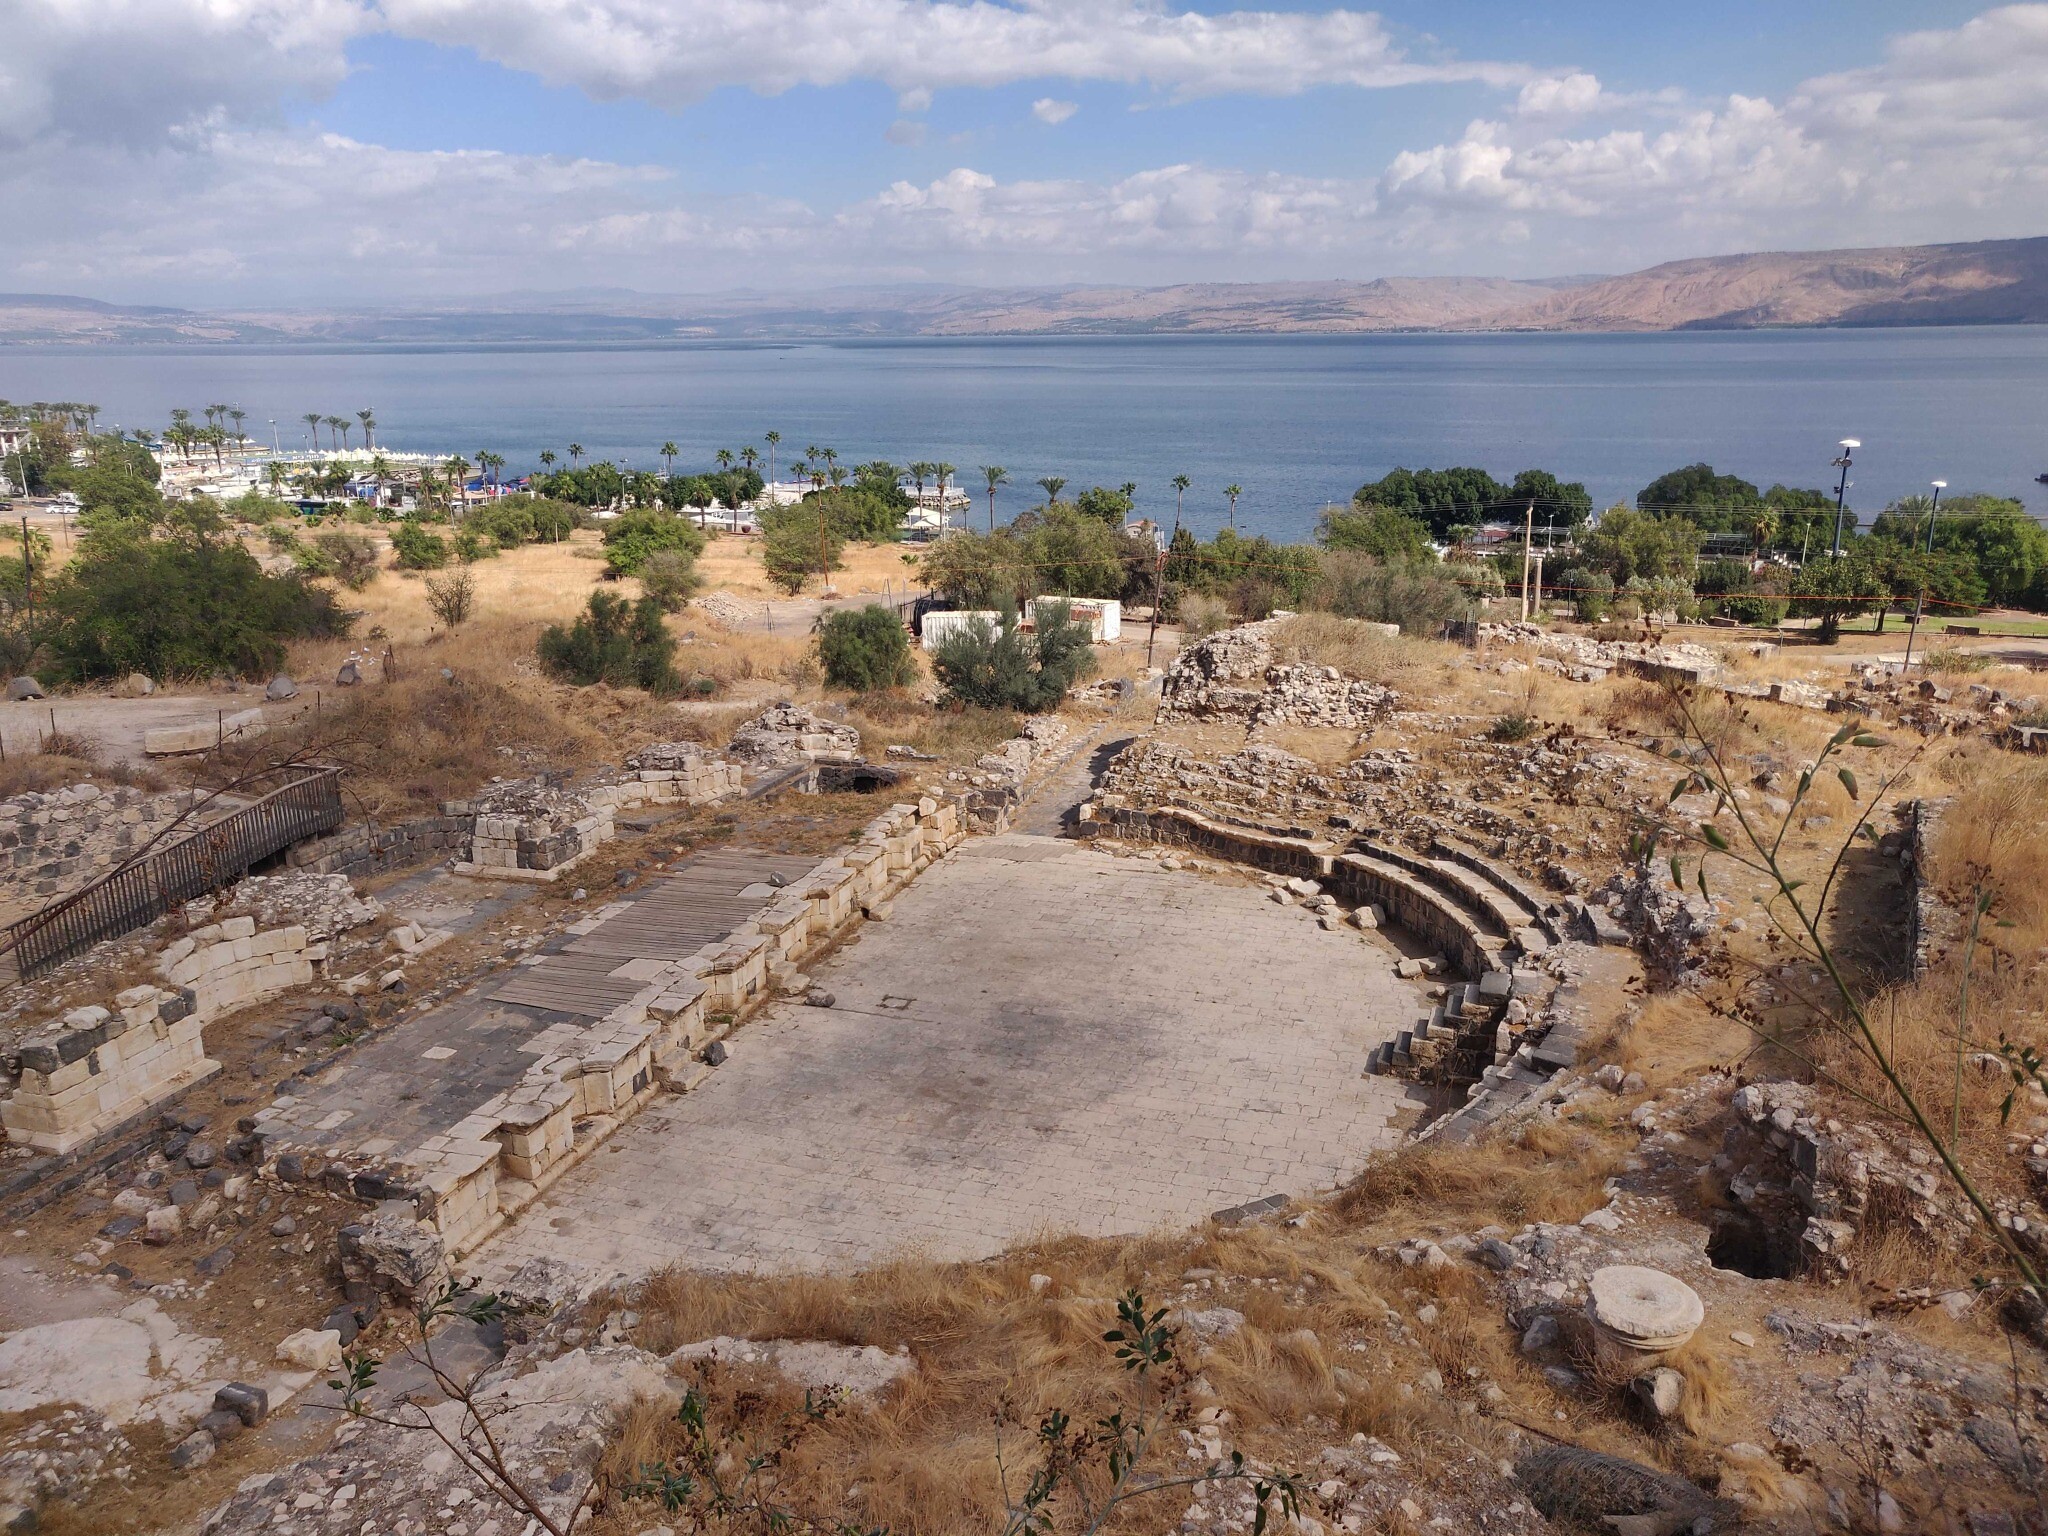 A huge ancient Roman theater unearthed in Tiberias lies neglected, October 19, 2021. (Michael Bachner/Times of Israel)